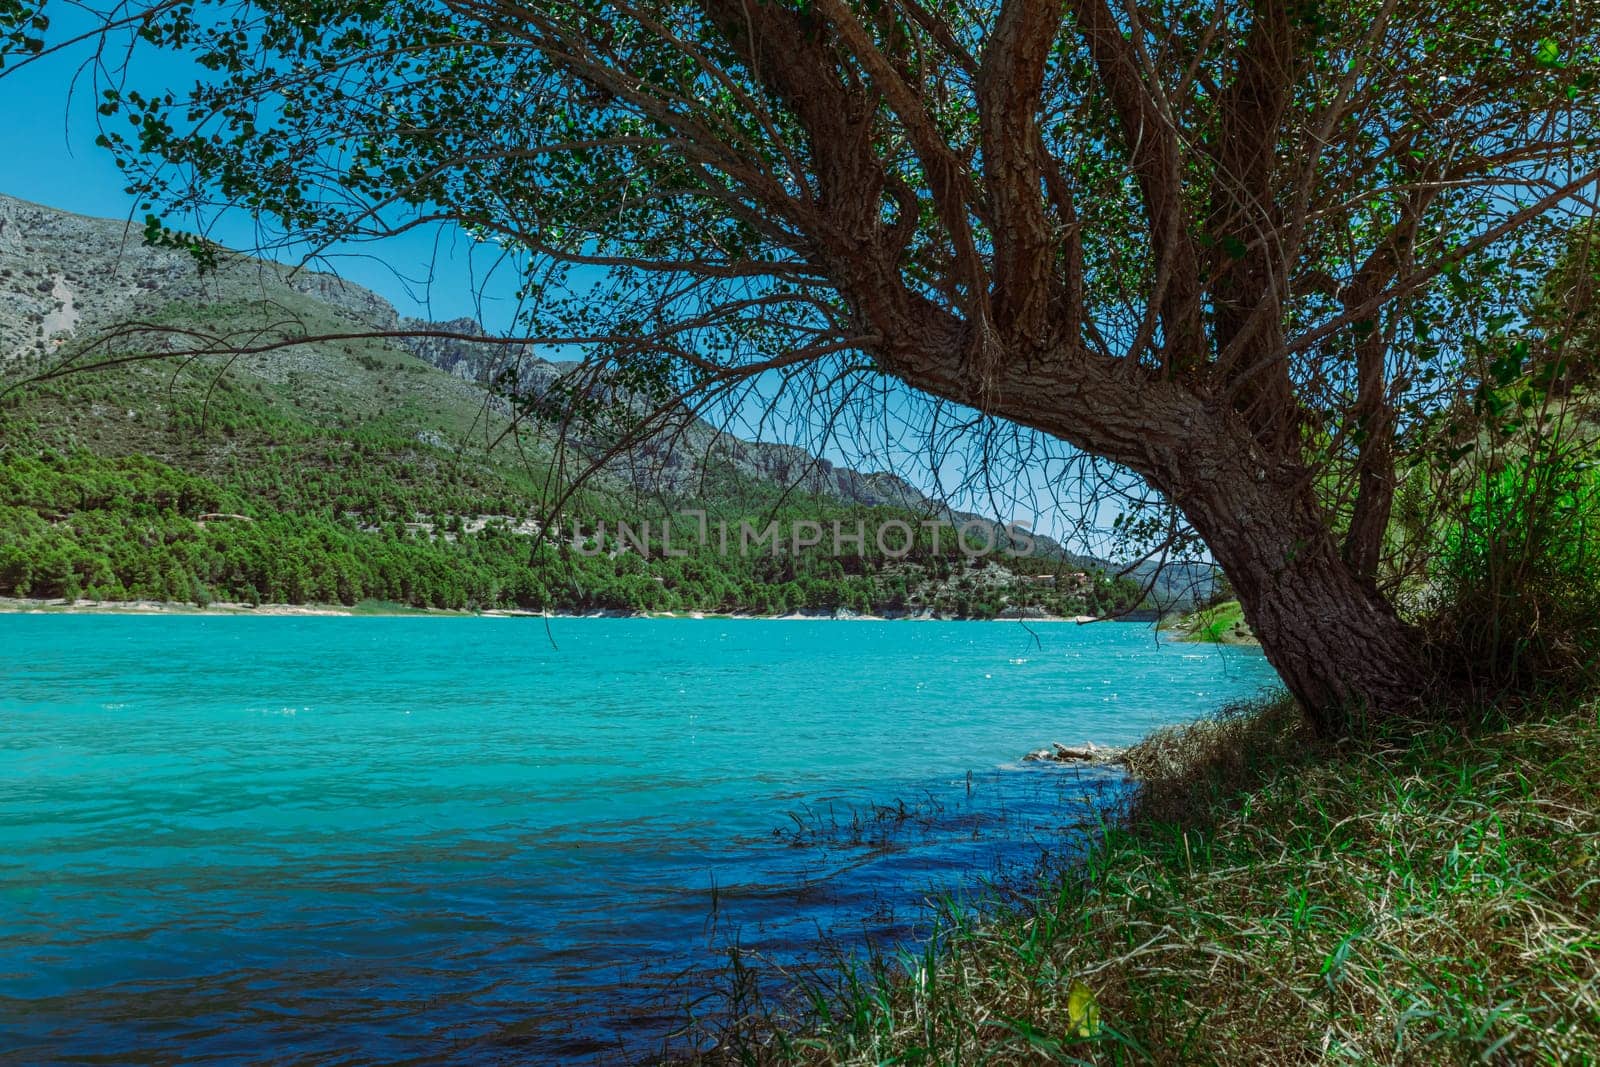 Mountain landscape, picturesque mountain lake on a summer morning, large panorama, Spain, Guadalest. High quality photo